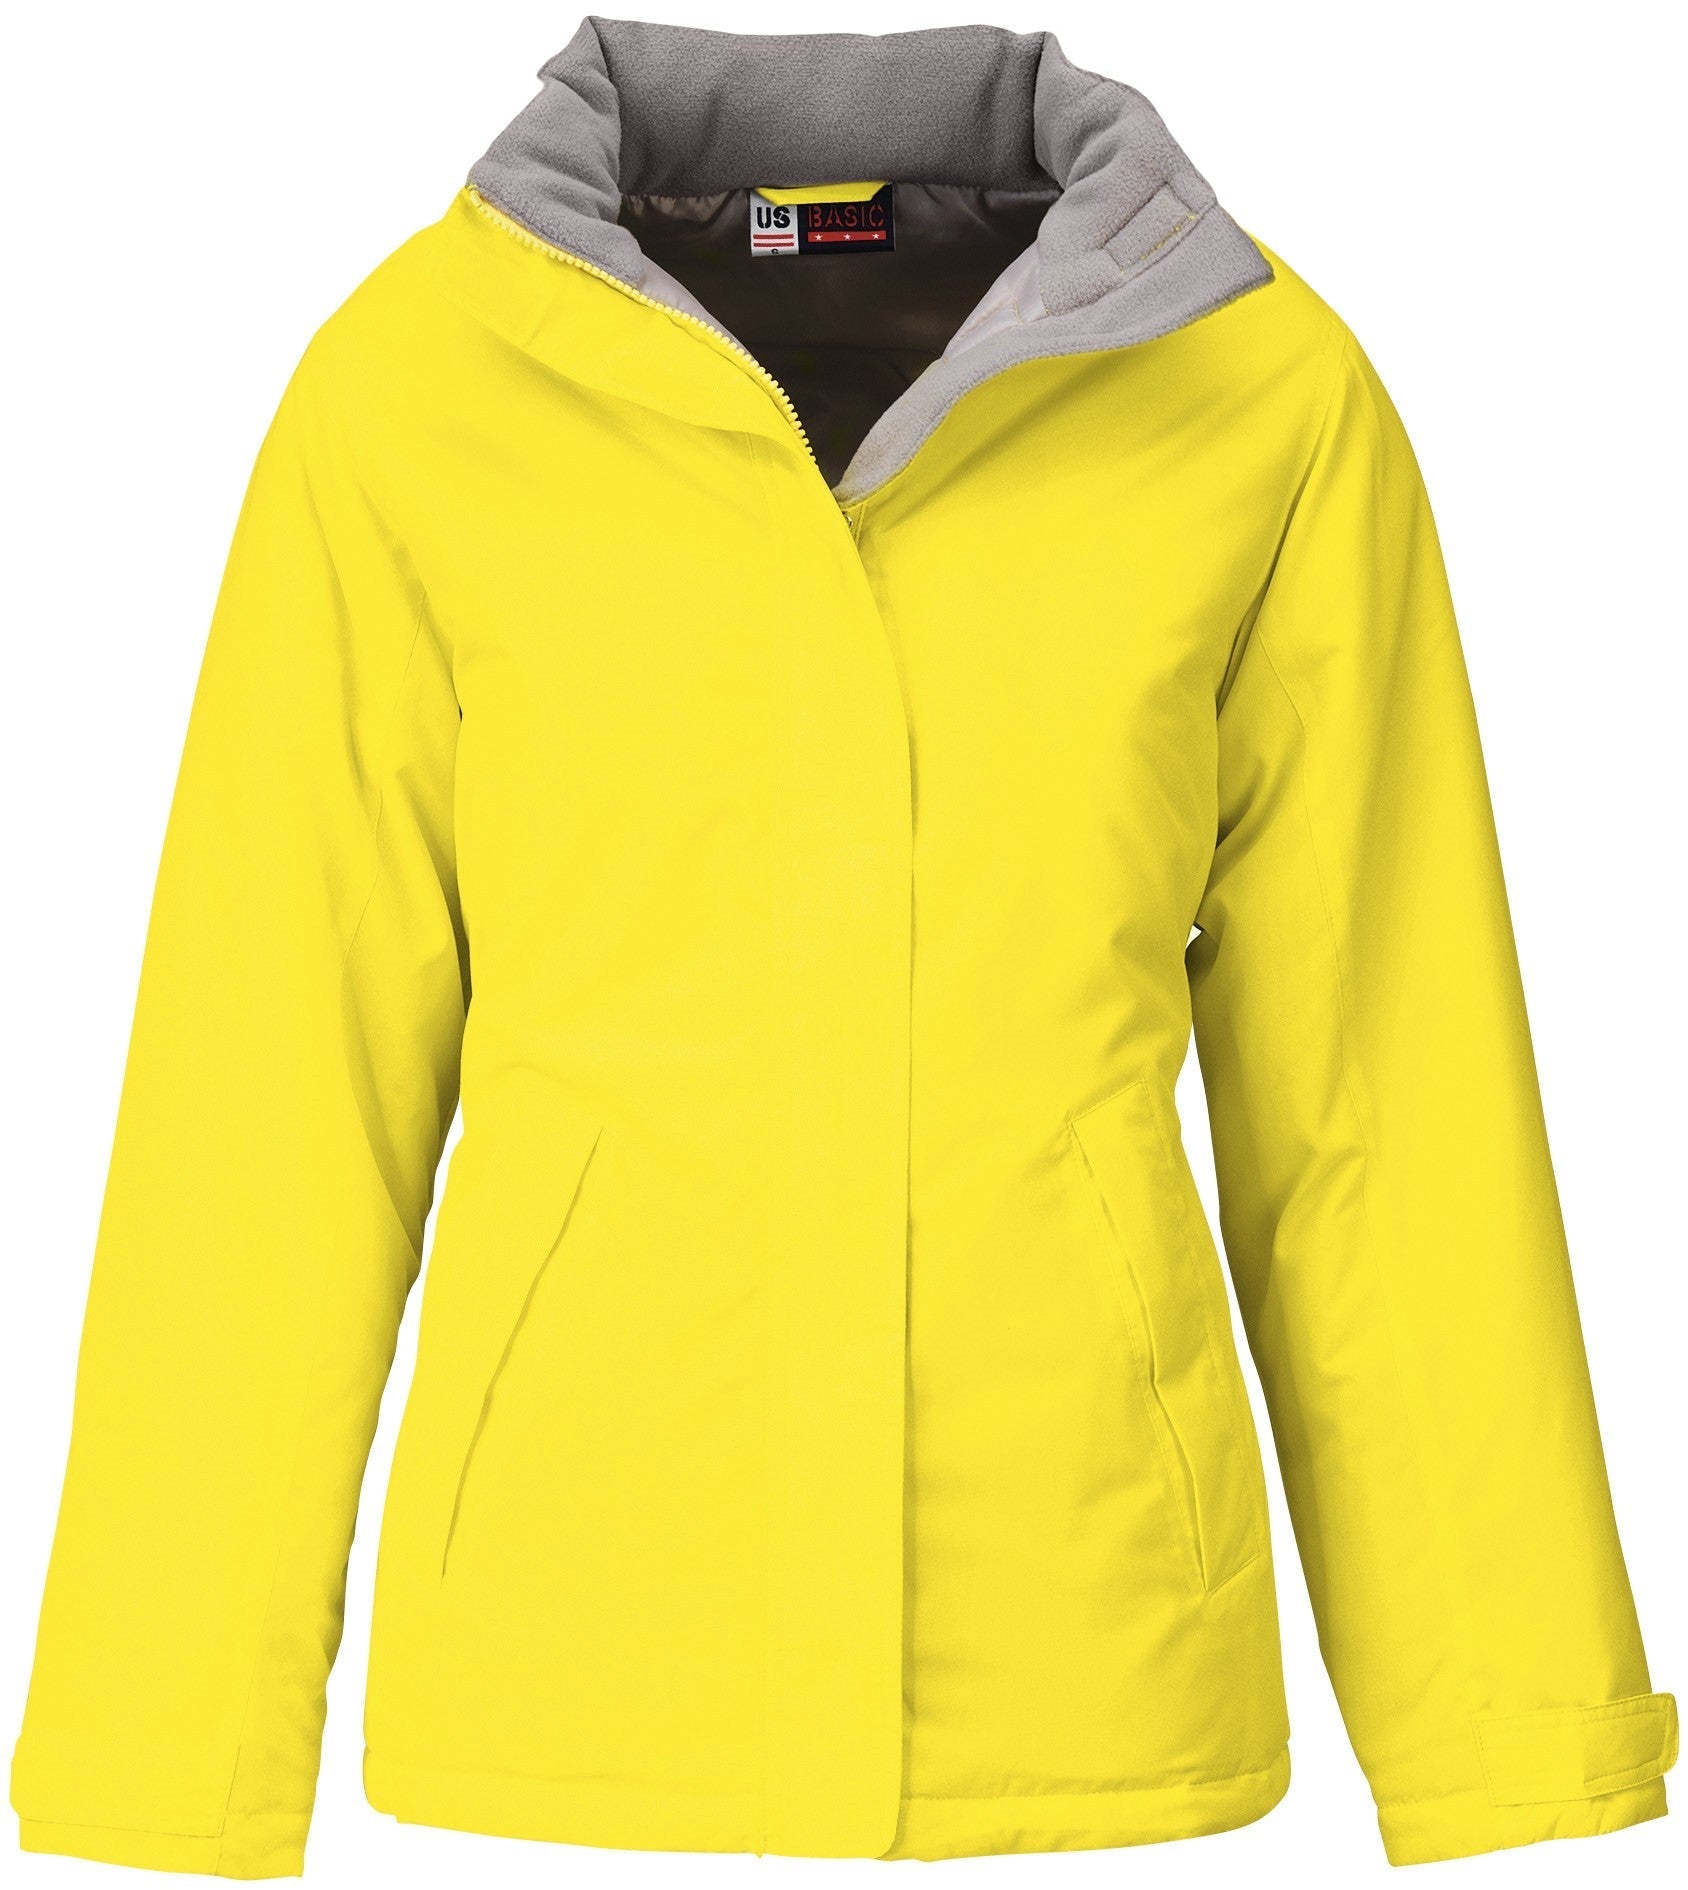 Ladies Hastings Parka - Red Only-L-Yellow-Y